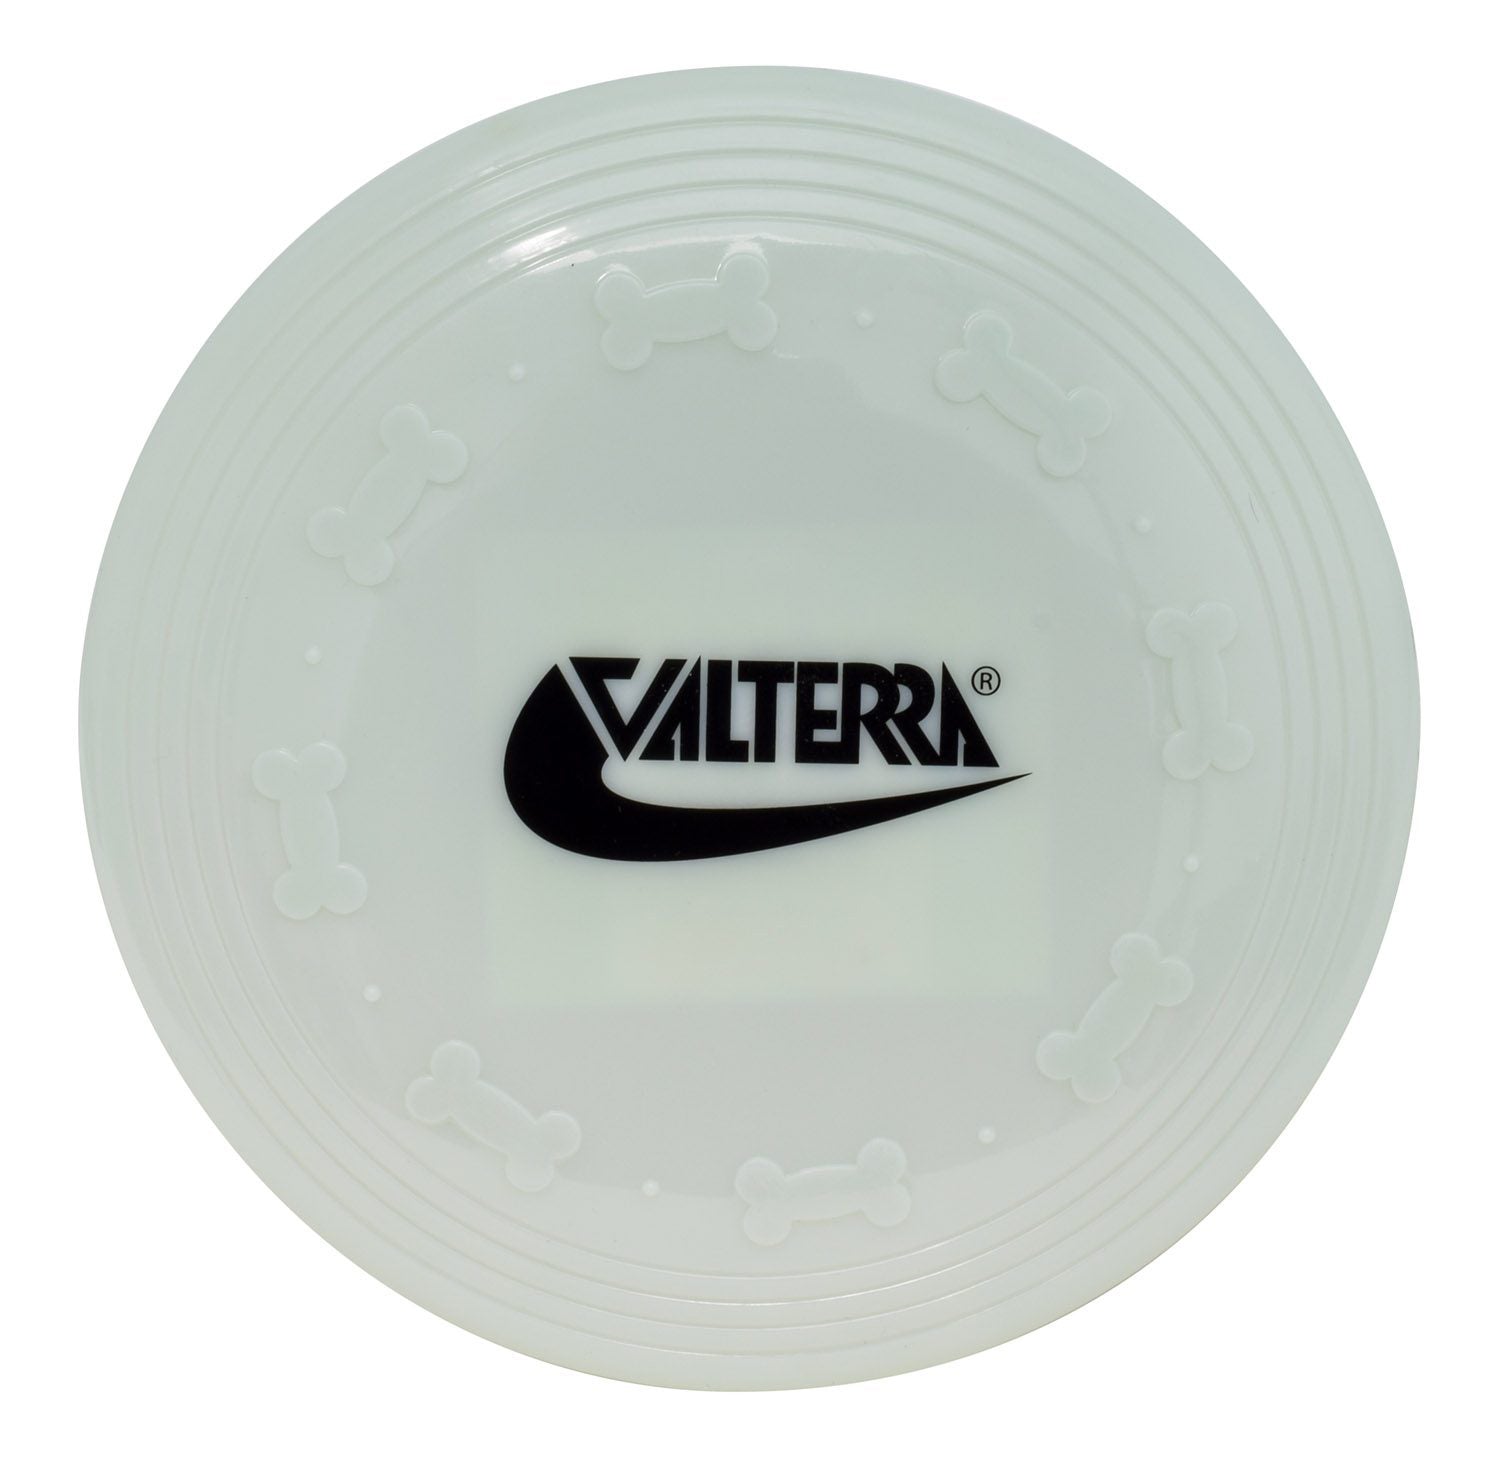 Valterra A10-2001 Go for the Glow Flying Disc